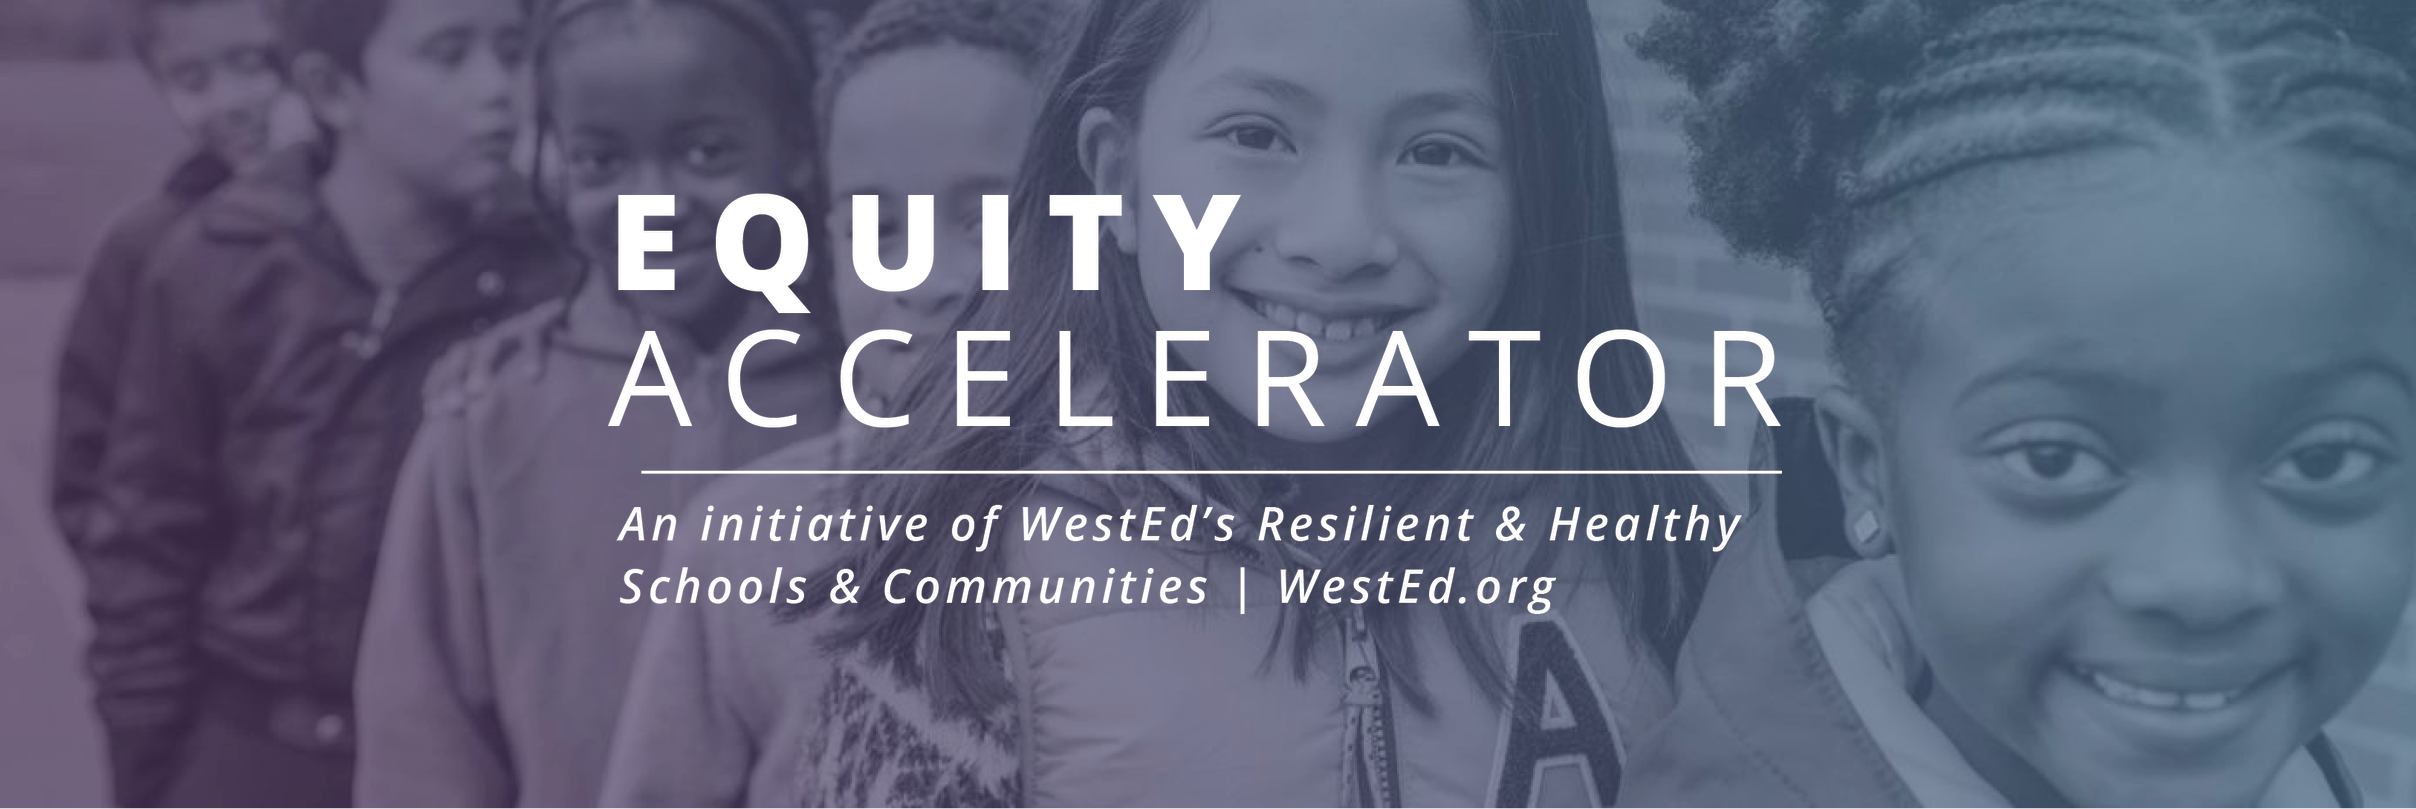 equity accelerator banner